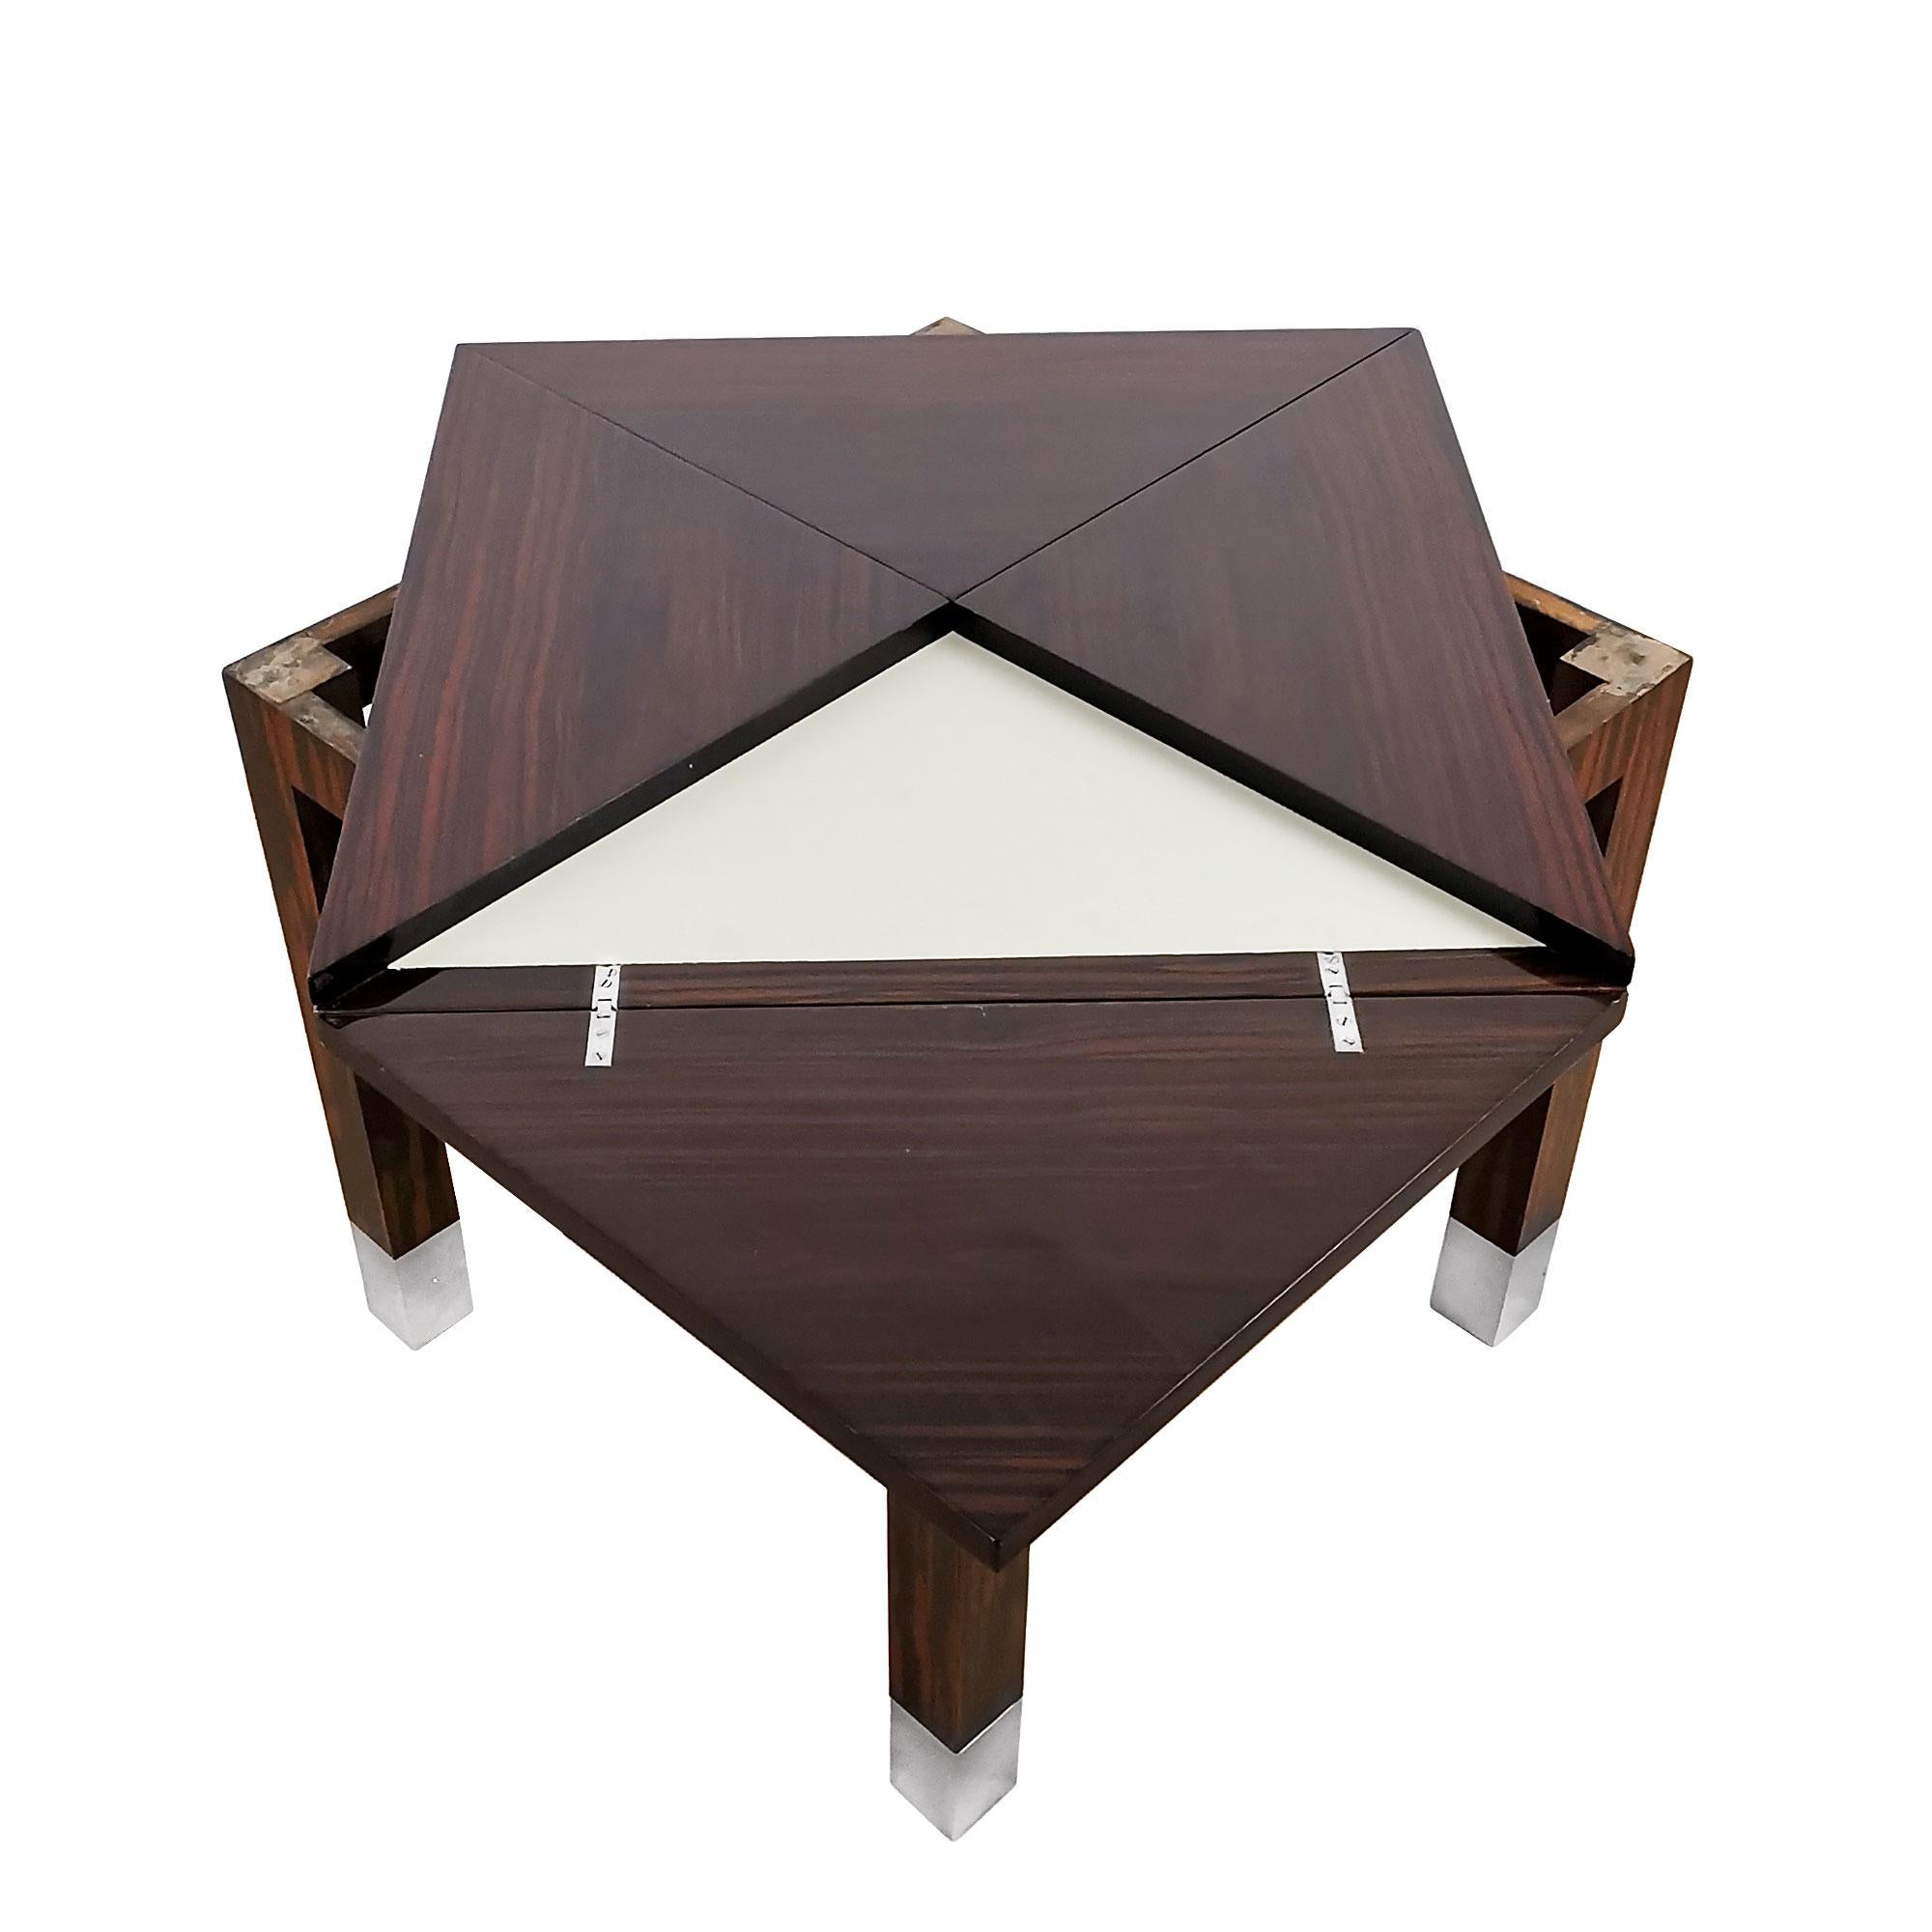 Mid-20th Century 1930s Art Deco Folding Game Table in Oak, Macassar Ebony and Brass - France For Sale